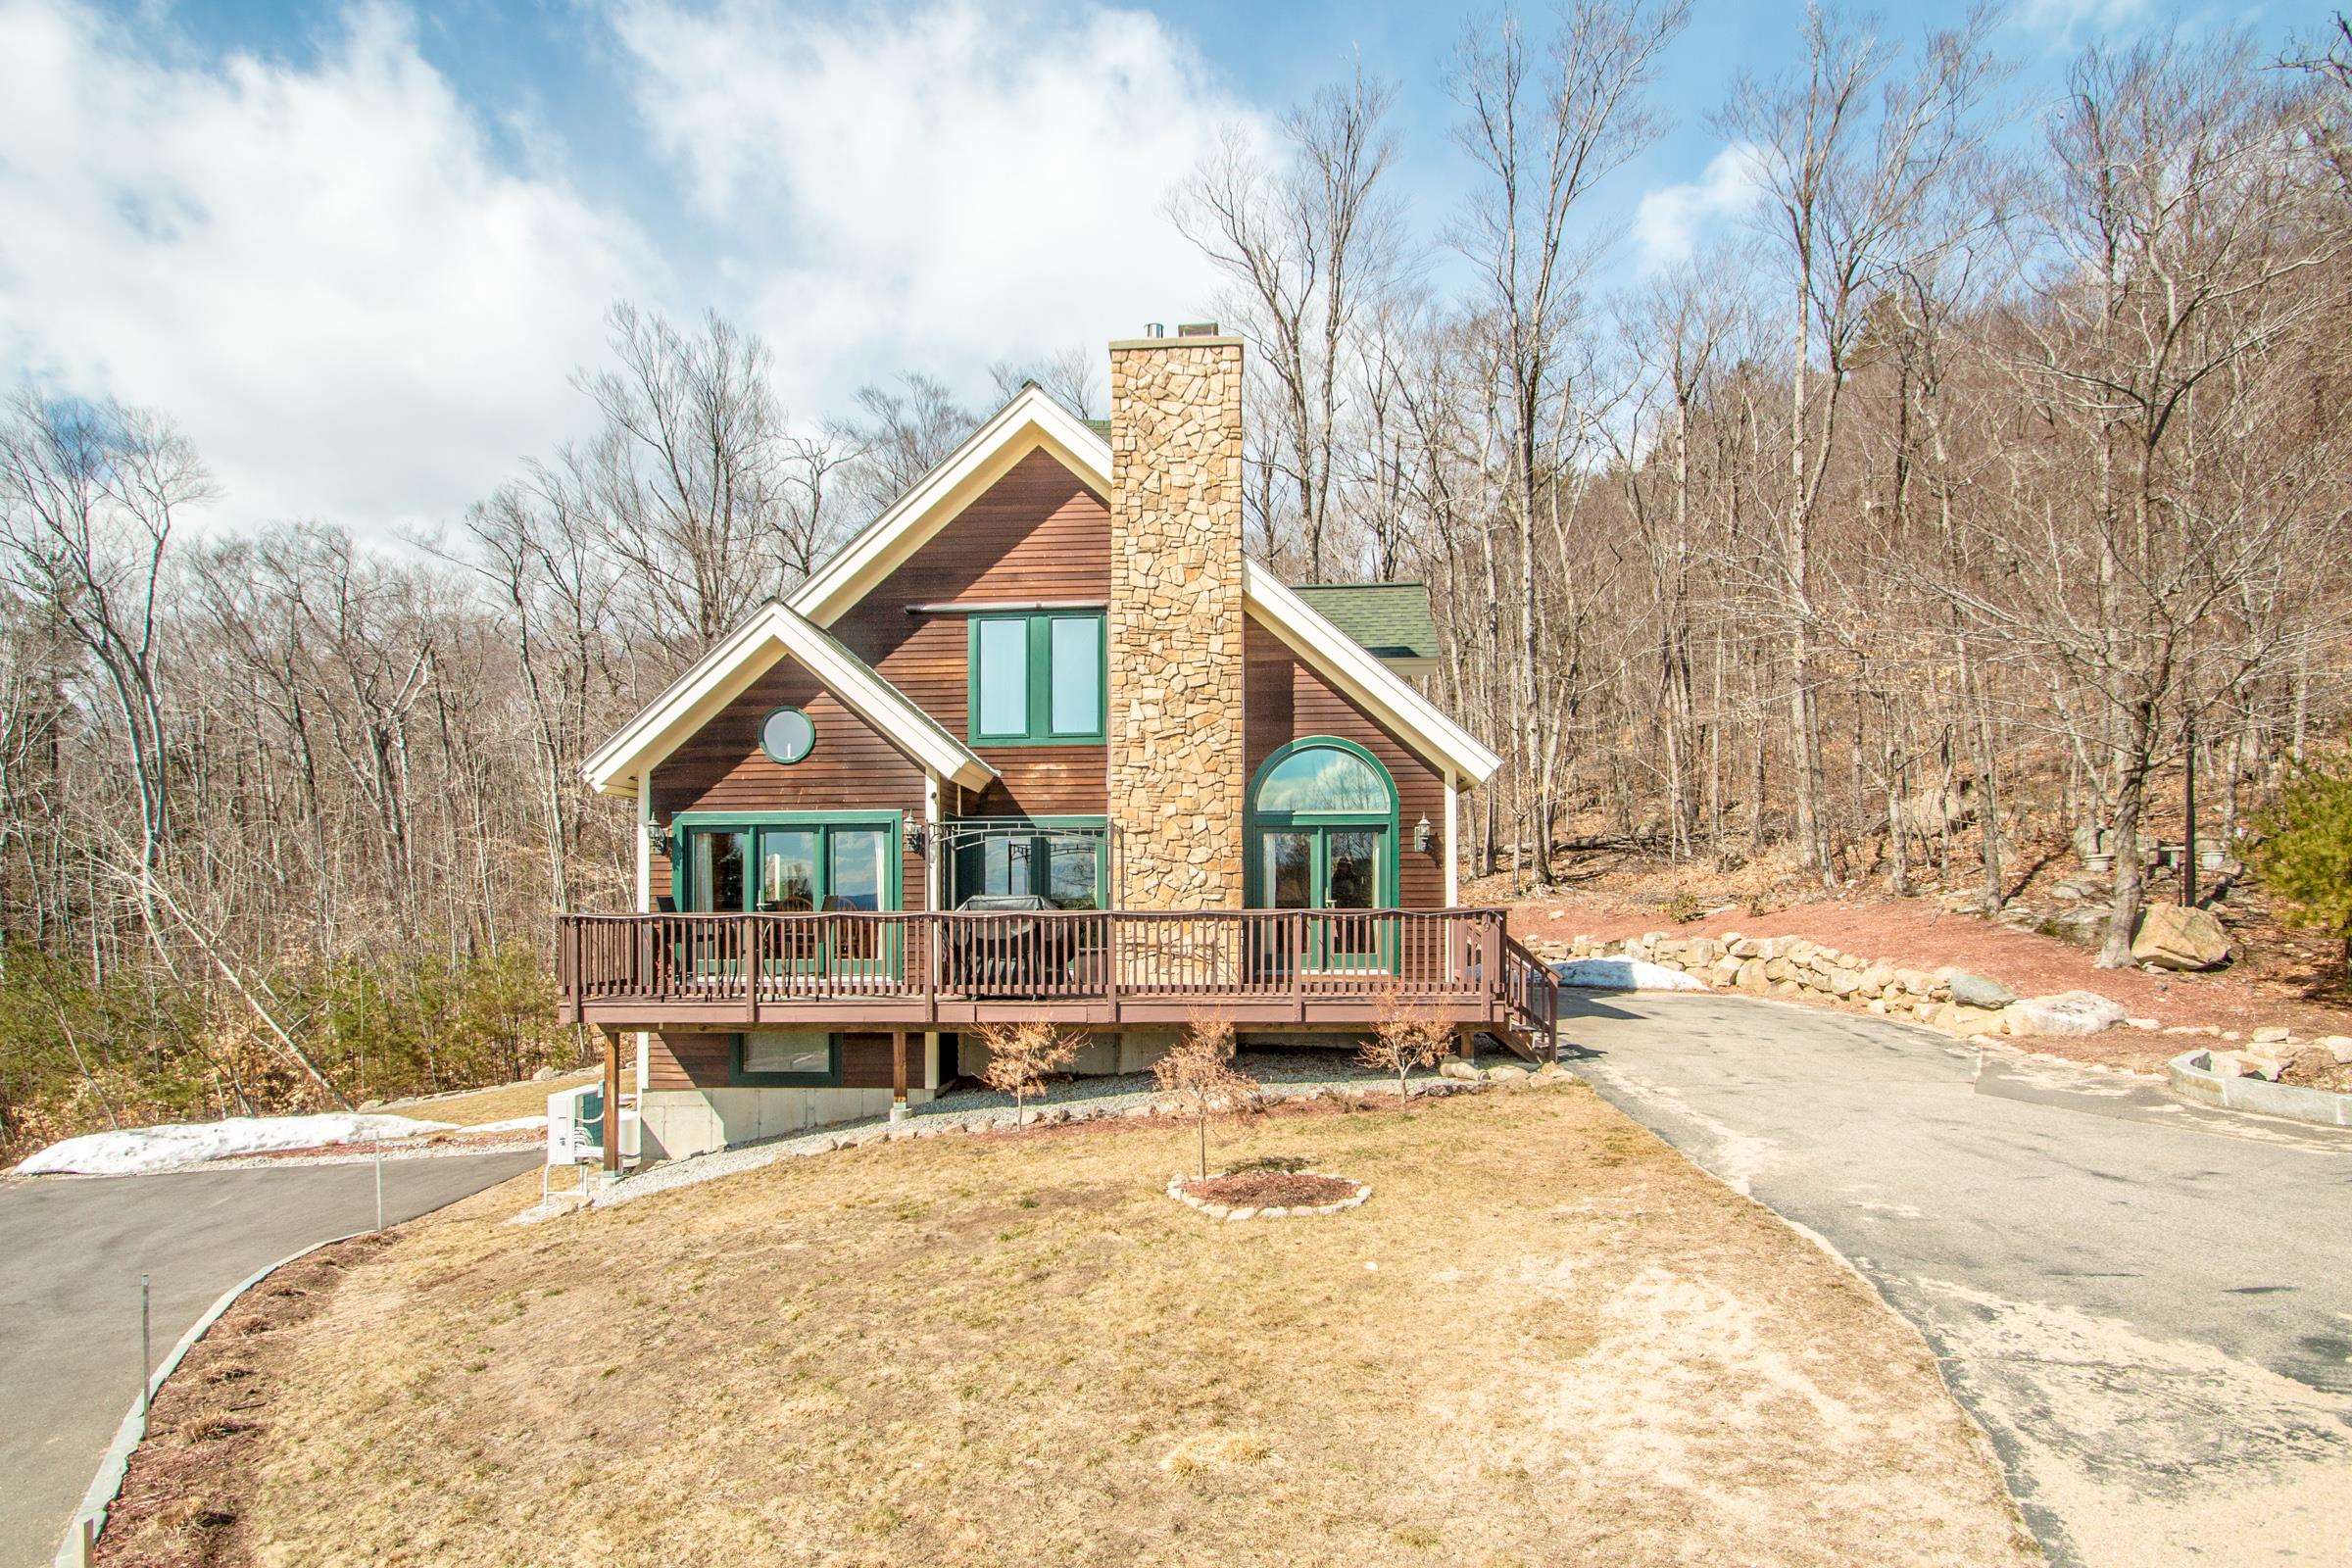 Stunning open concept Contemporary Chalet with beautiful mountain views. Located so close to everything the Mt. Washington Valley has to offer. Perfectly set on a knoll in a private neighborhood just outside of town and abuts 1200 acres of conservation land! Bright cheery floor plan that flows from room to room. The home has a large living room with cathedral ceilings, a first floor bedroom and bath with two bedrooms and bath in the upper level. The basement has been finished with nothing but taste and fun in mind. The lower level family room has great space for entertaining your guests with a wet bar & plenty of room for family game and movie night. Relax out on the deck while you soak in the suns rays or watch the shooting stars fill the nights sky. This truly is the perfect home. Open house Saturday 3/26 from 11am -1pm & Sunday 3/27 2pm - 4pm.